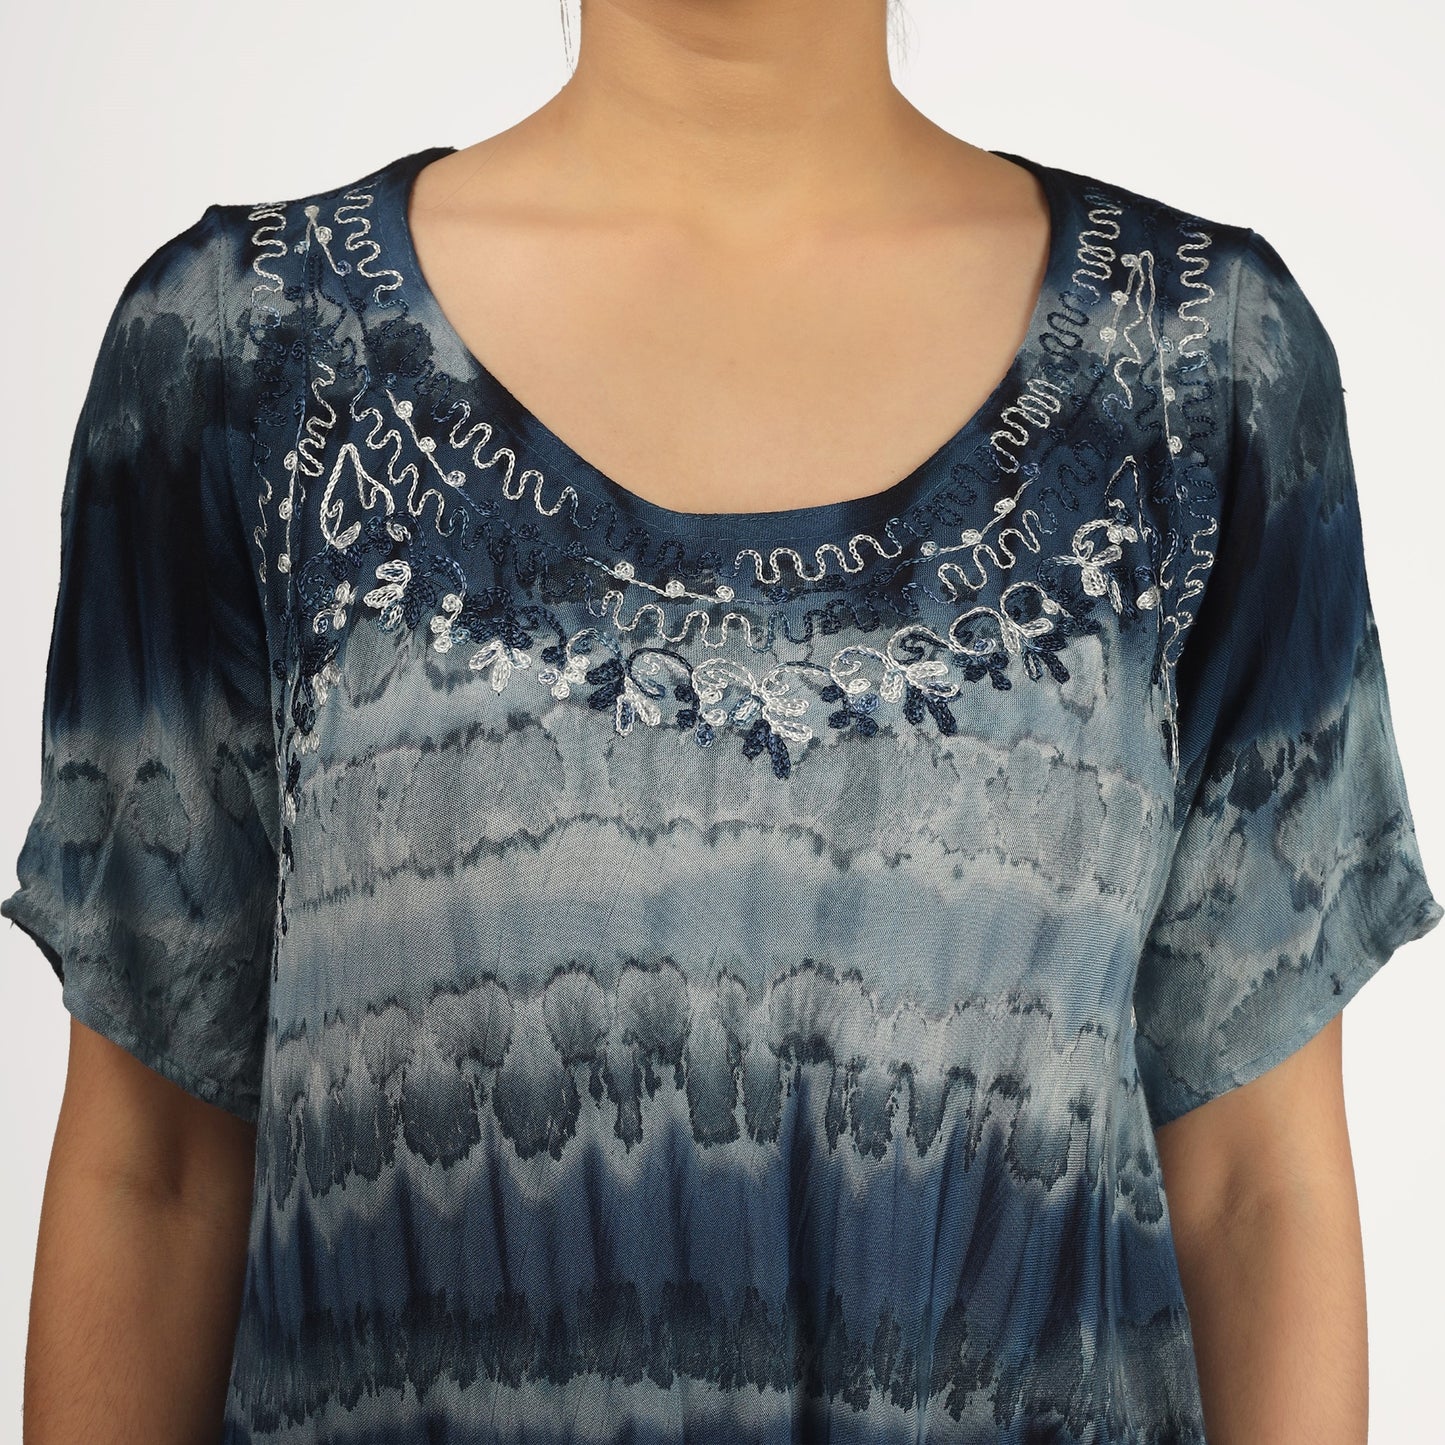 Earthen Threads Boho Summers Tie-Dye Embroidered Poncho Top Free Size